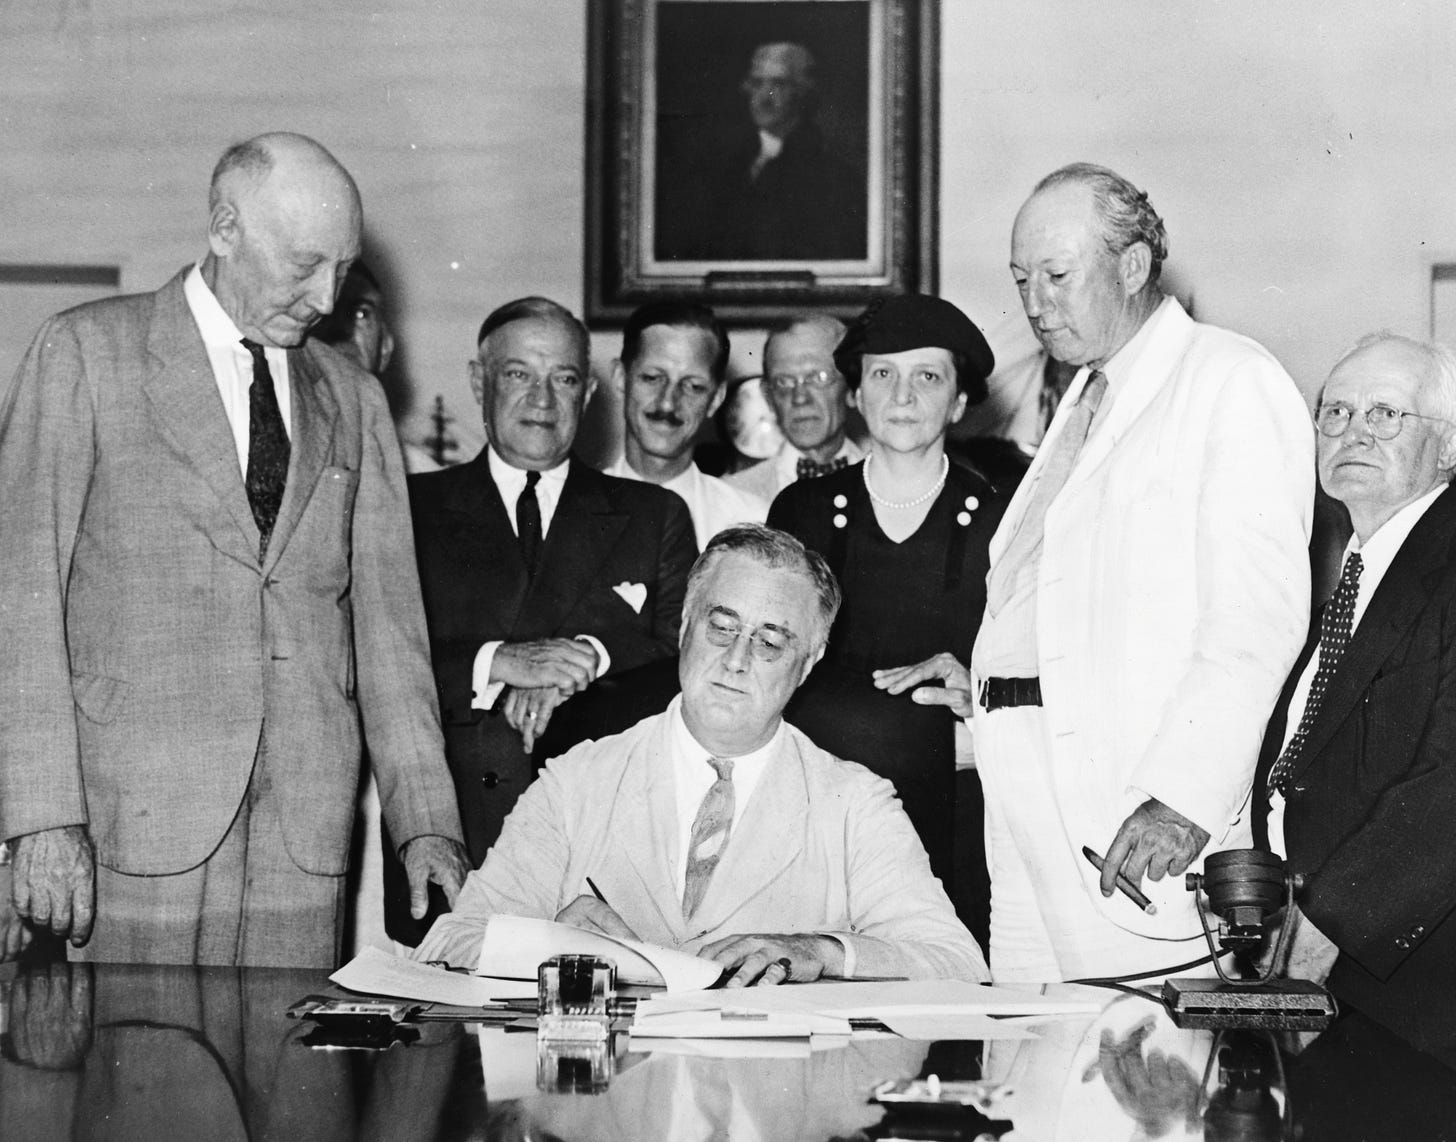 FDR seated, looking down at document he is signing while surrounded by several other people, mostly older white men. Portrait of Thomas Jefferson visible on wall behind them.